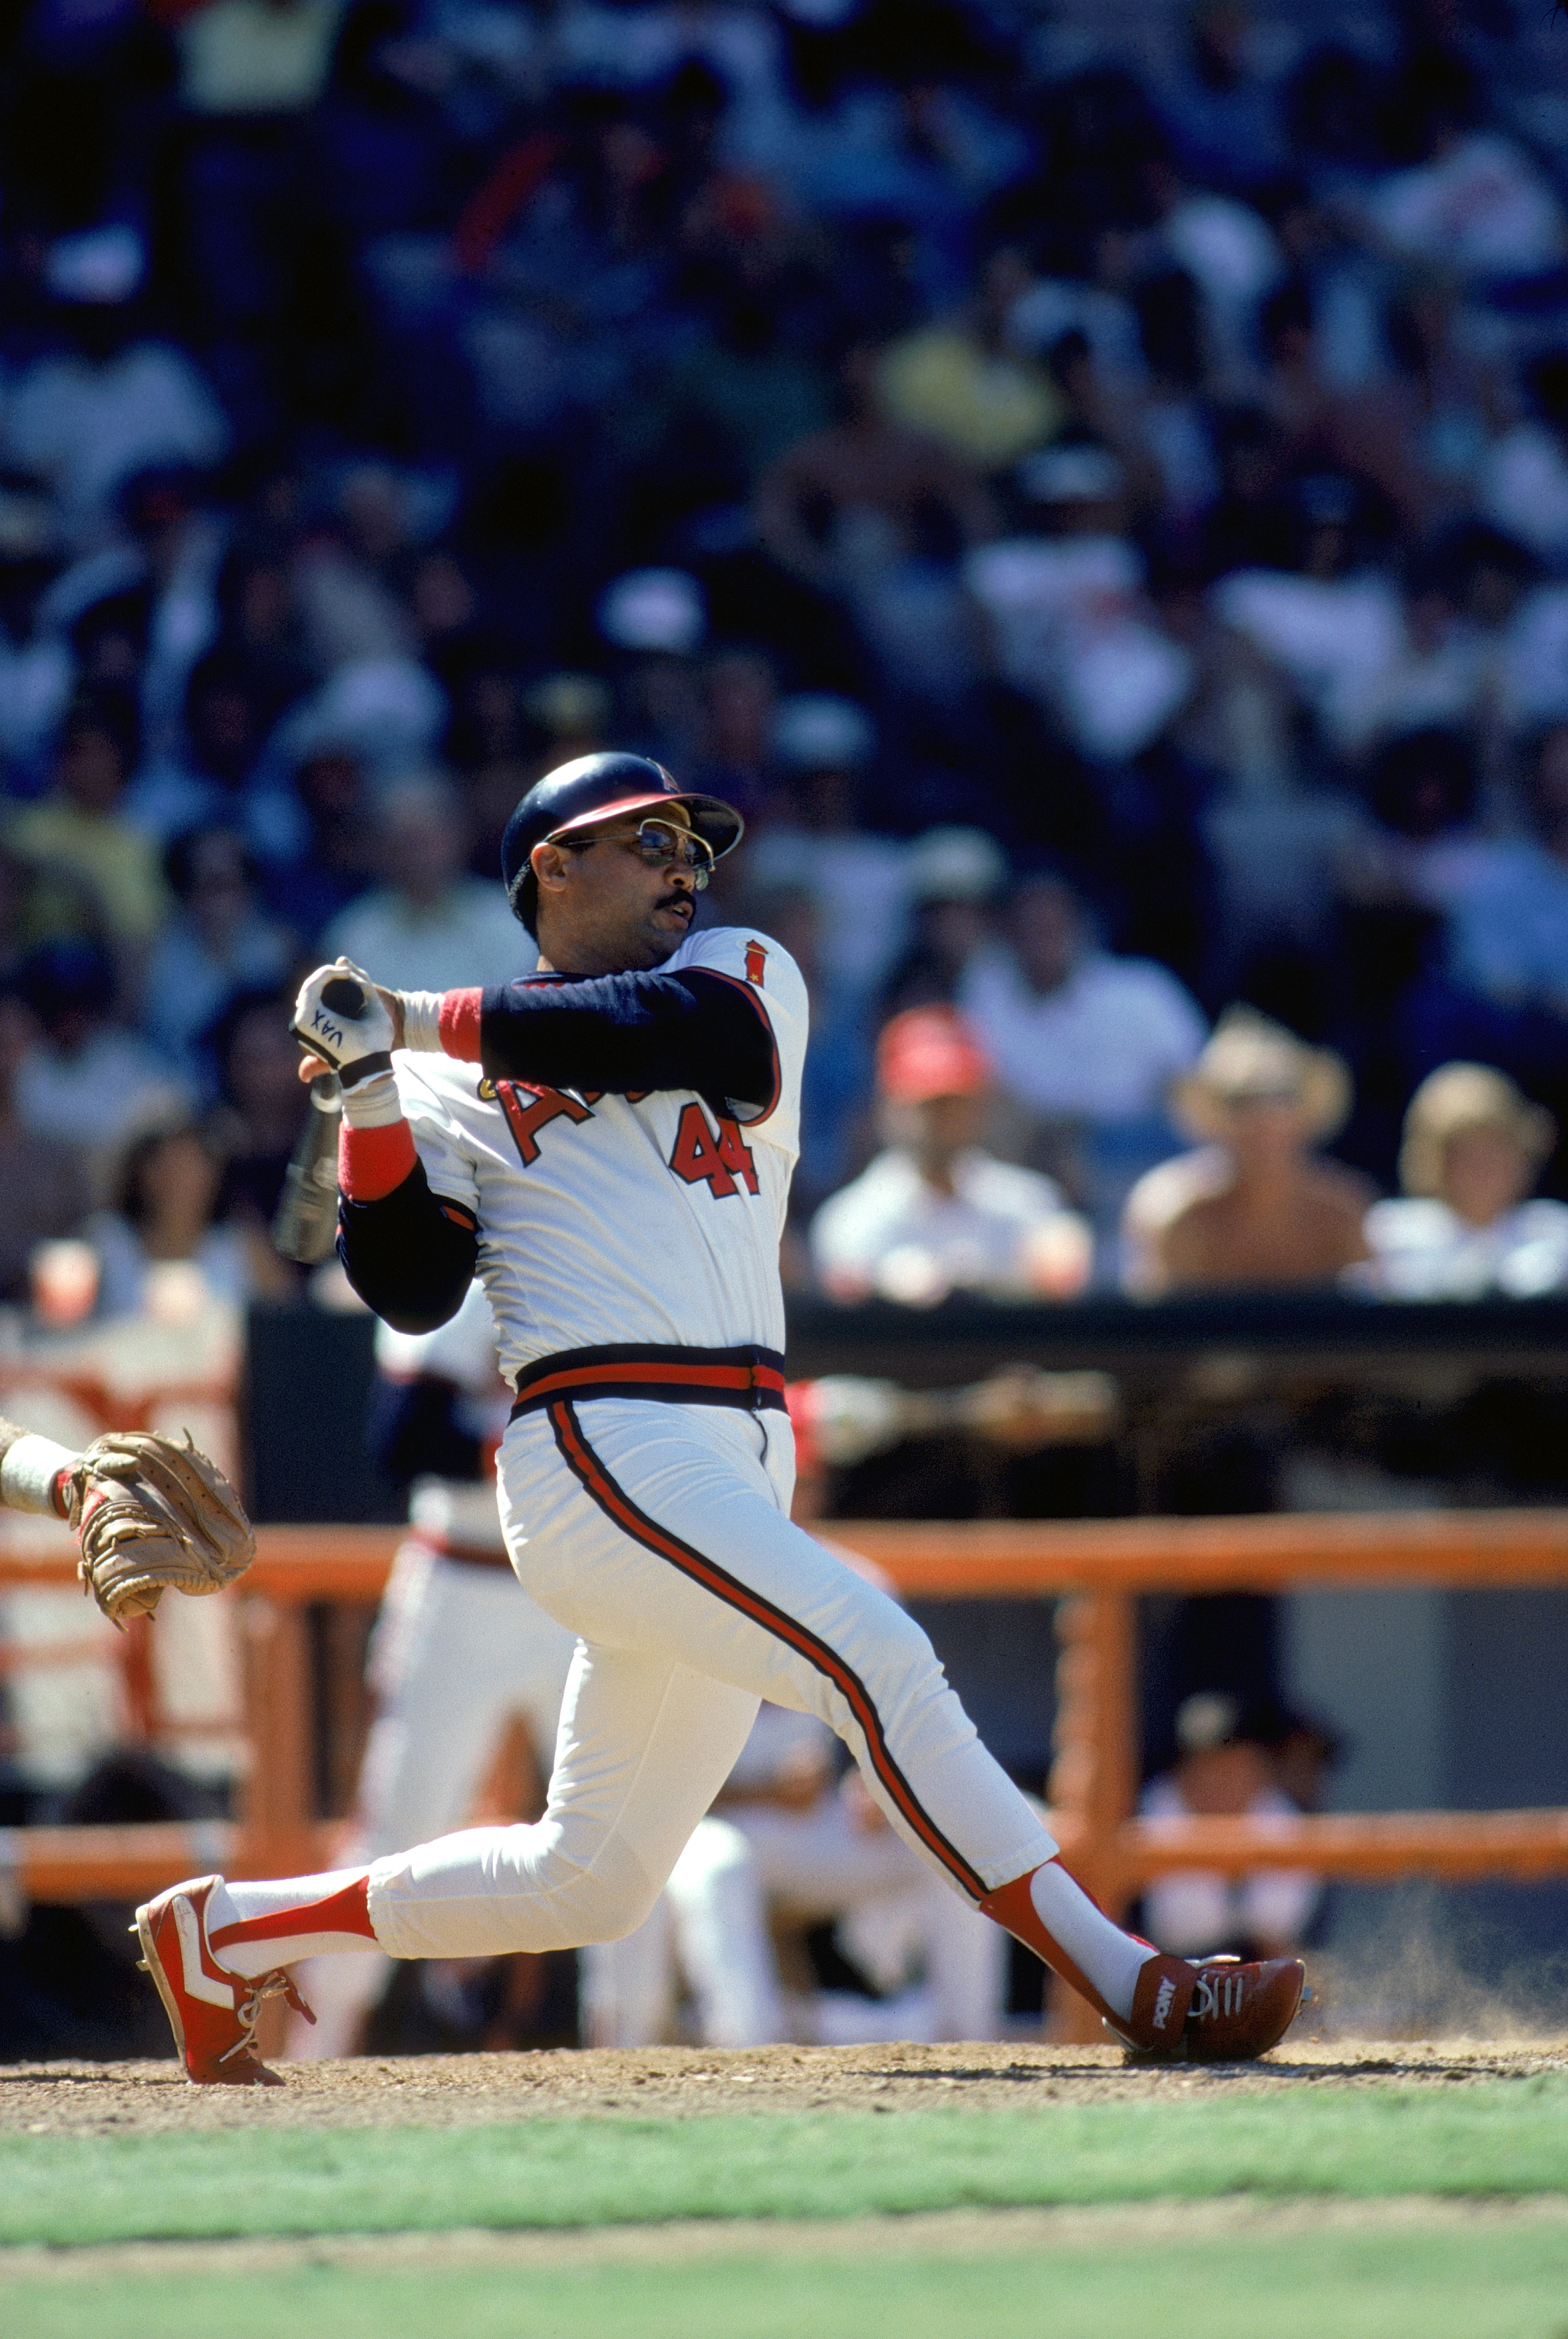 ANAHEIM, CA - 1984:  Reggie Jackson #44 of the California Angels watches the flight of his hit during a 1984 MLB game at Angel Stadium in Anaheim, California. (Photo by Rick Stewart/Getty Images)